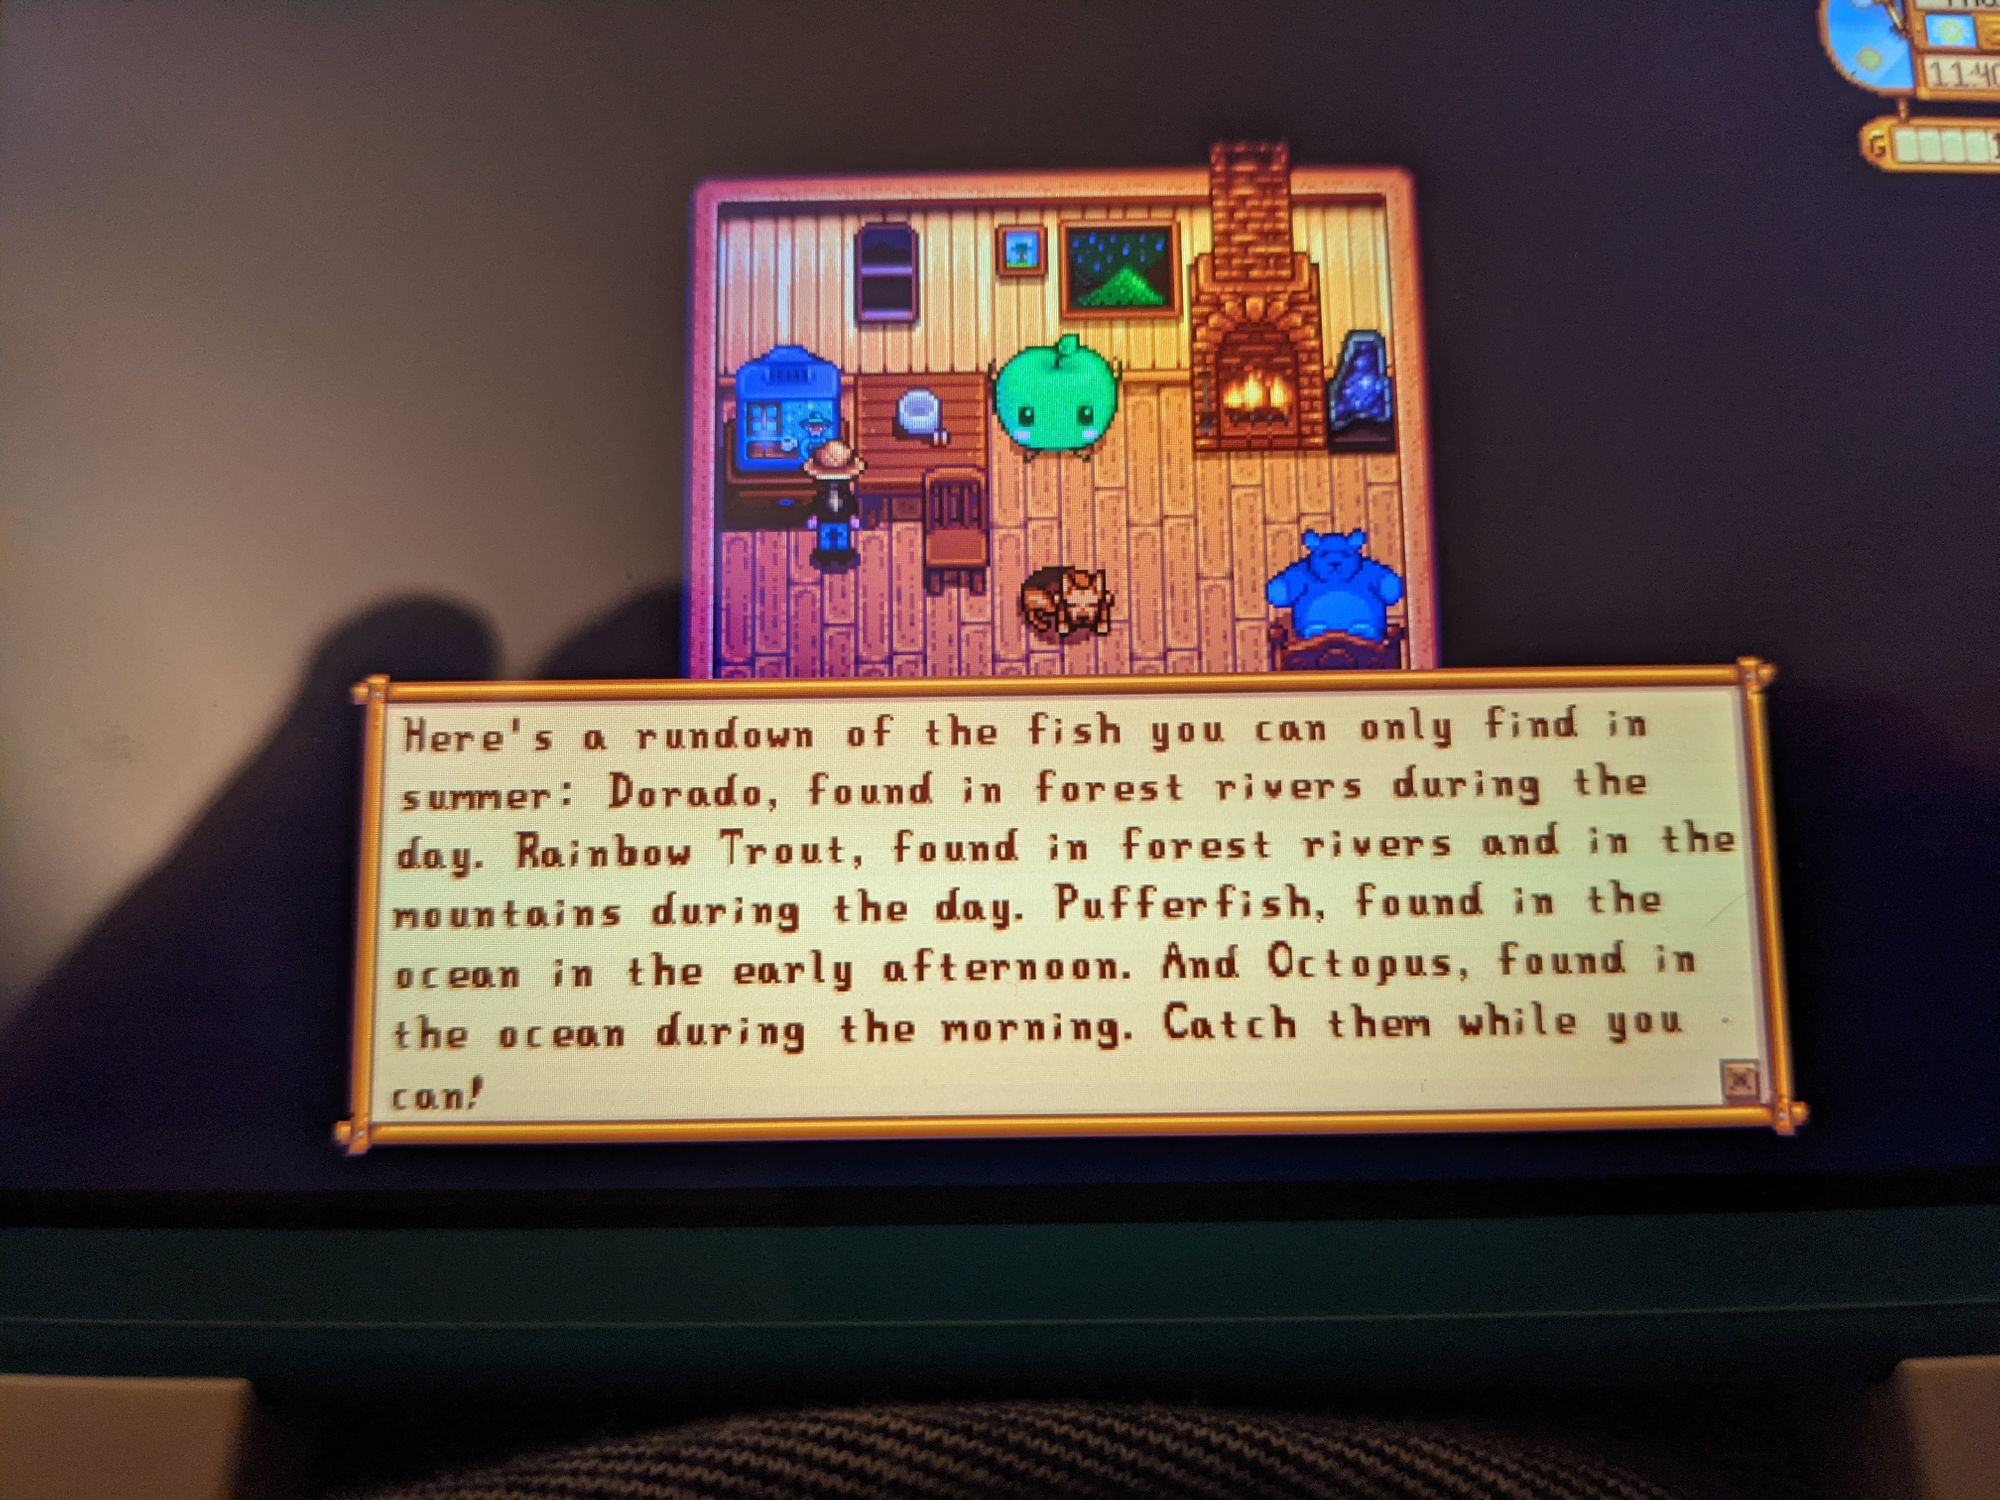 A phone picture of my switch screen, which has my farmer in Stardew Valley looking at the TV which is talking about various fish you can find this current season.